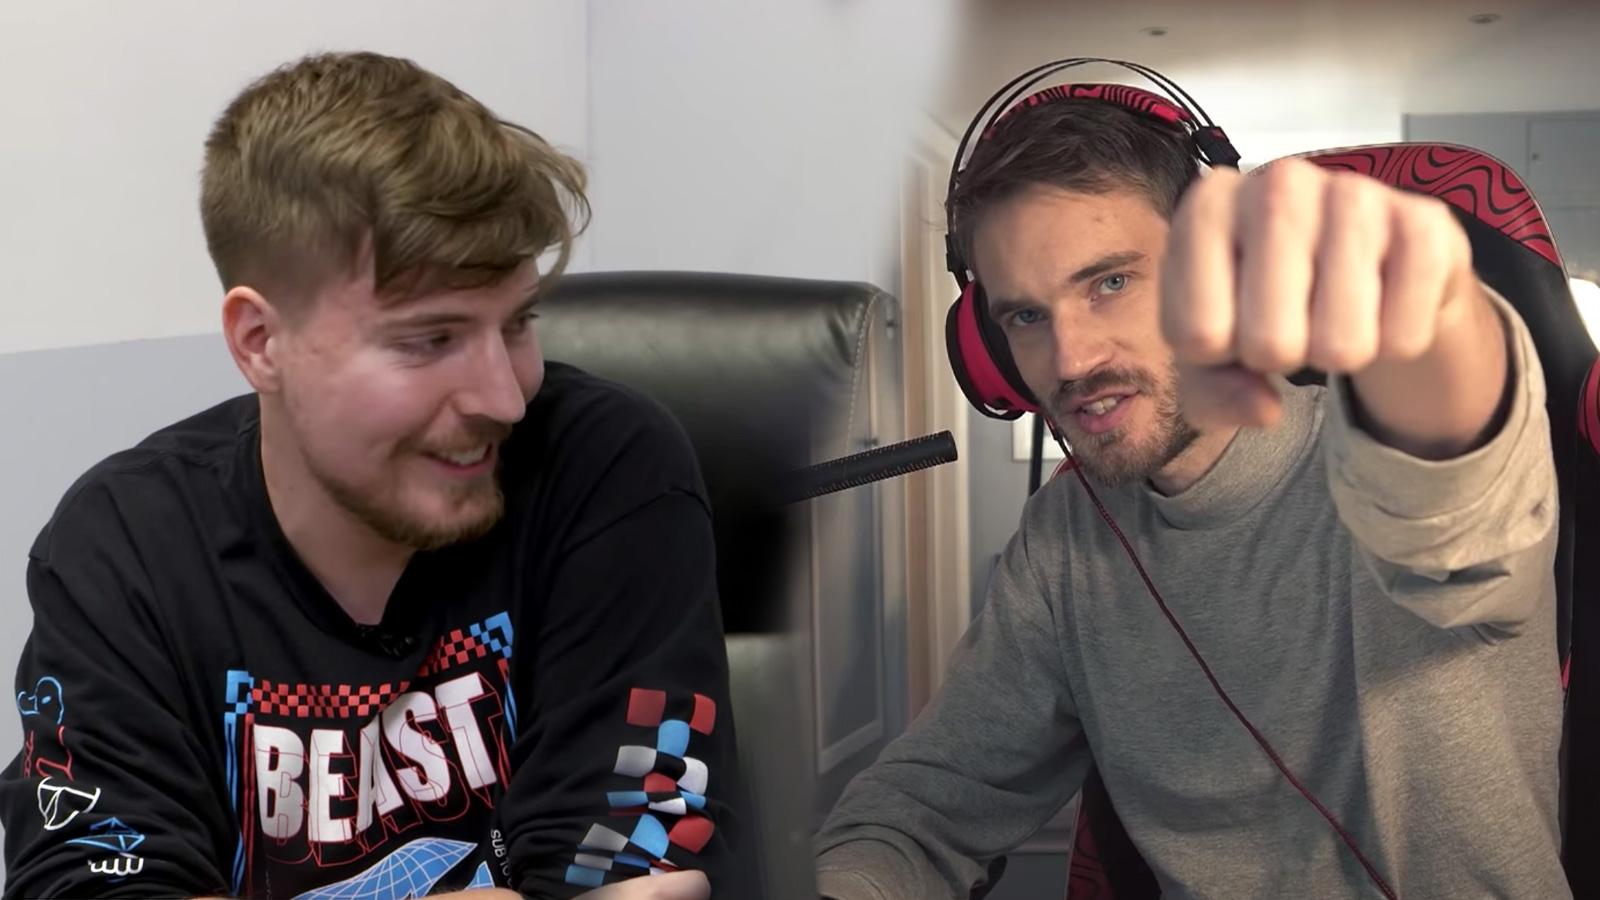 Bro Really Became the Beast in MrBeast”- Fans Share Their Positive